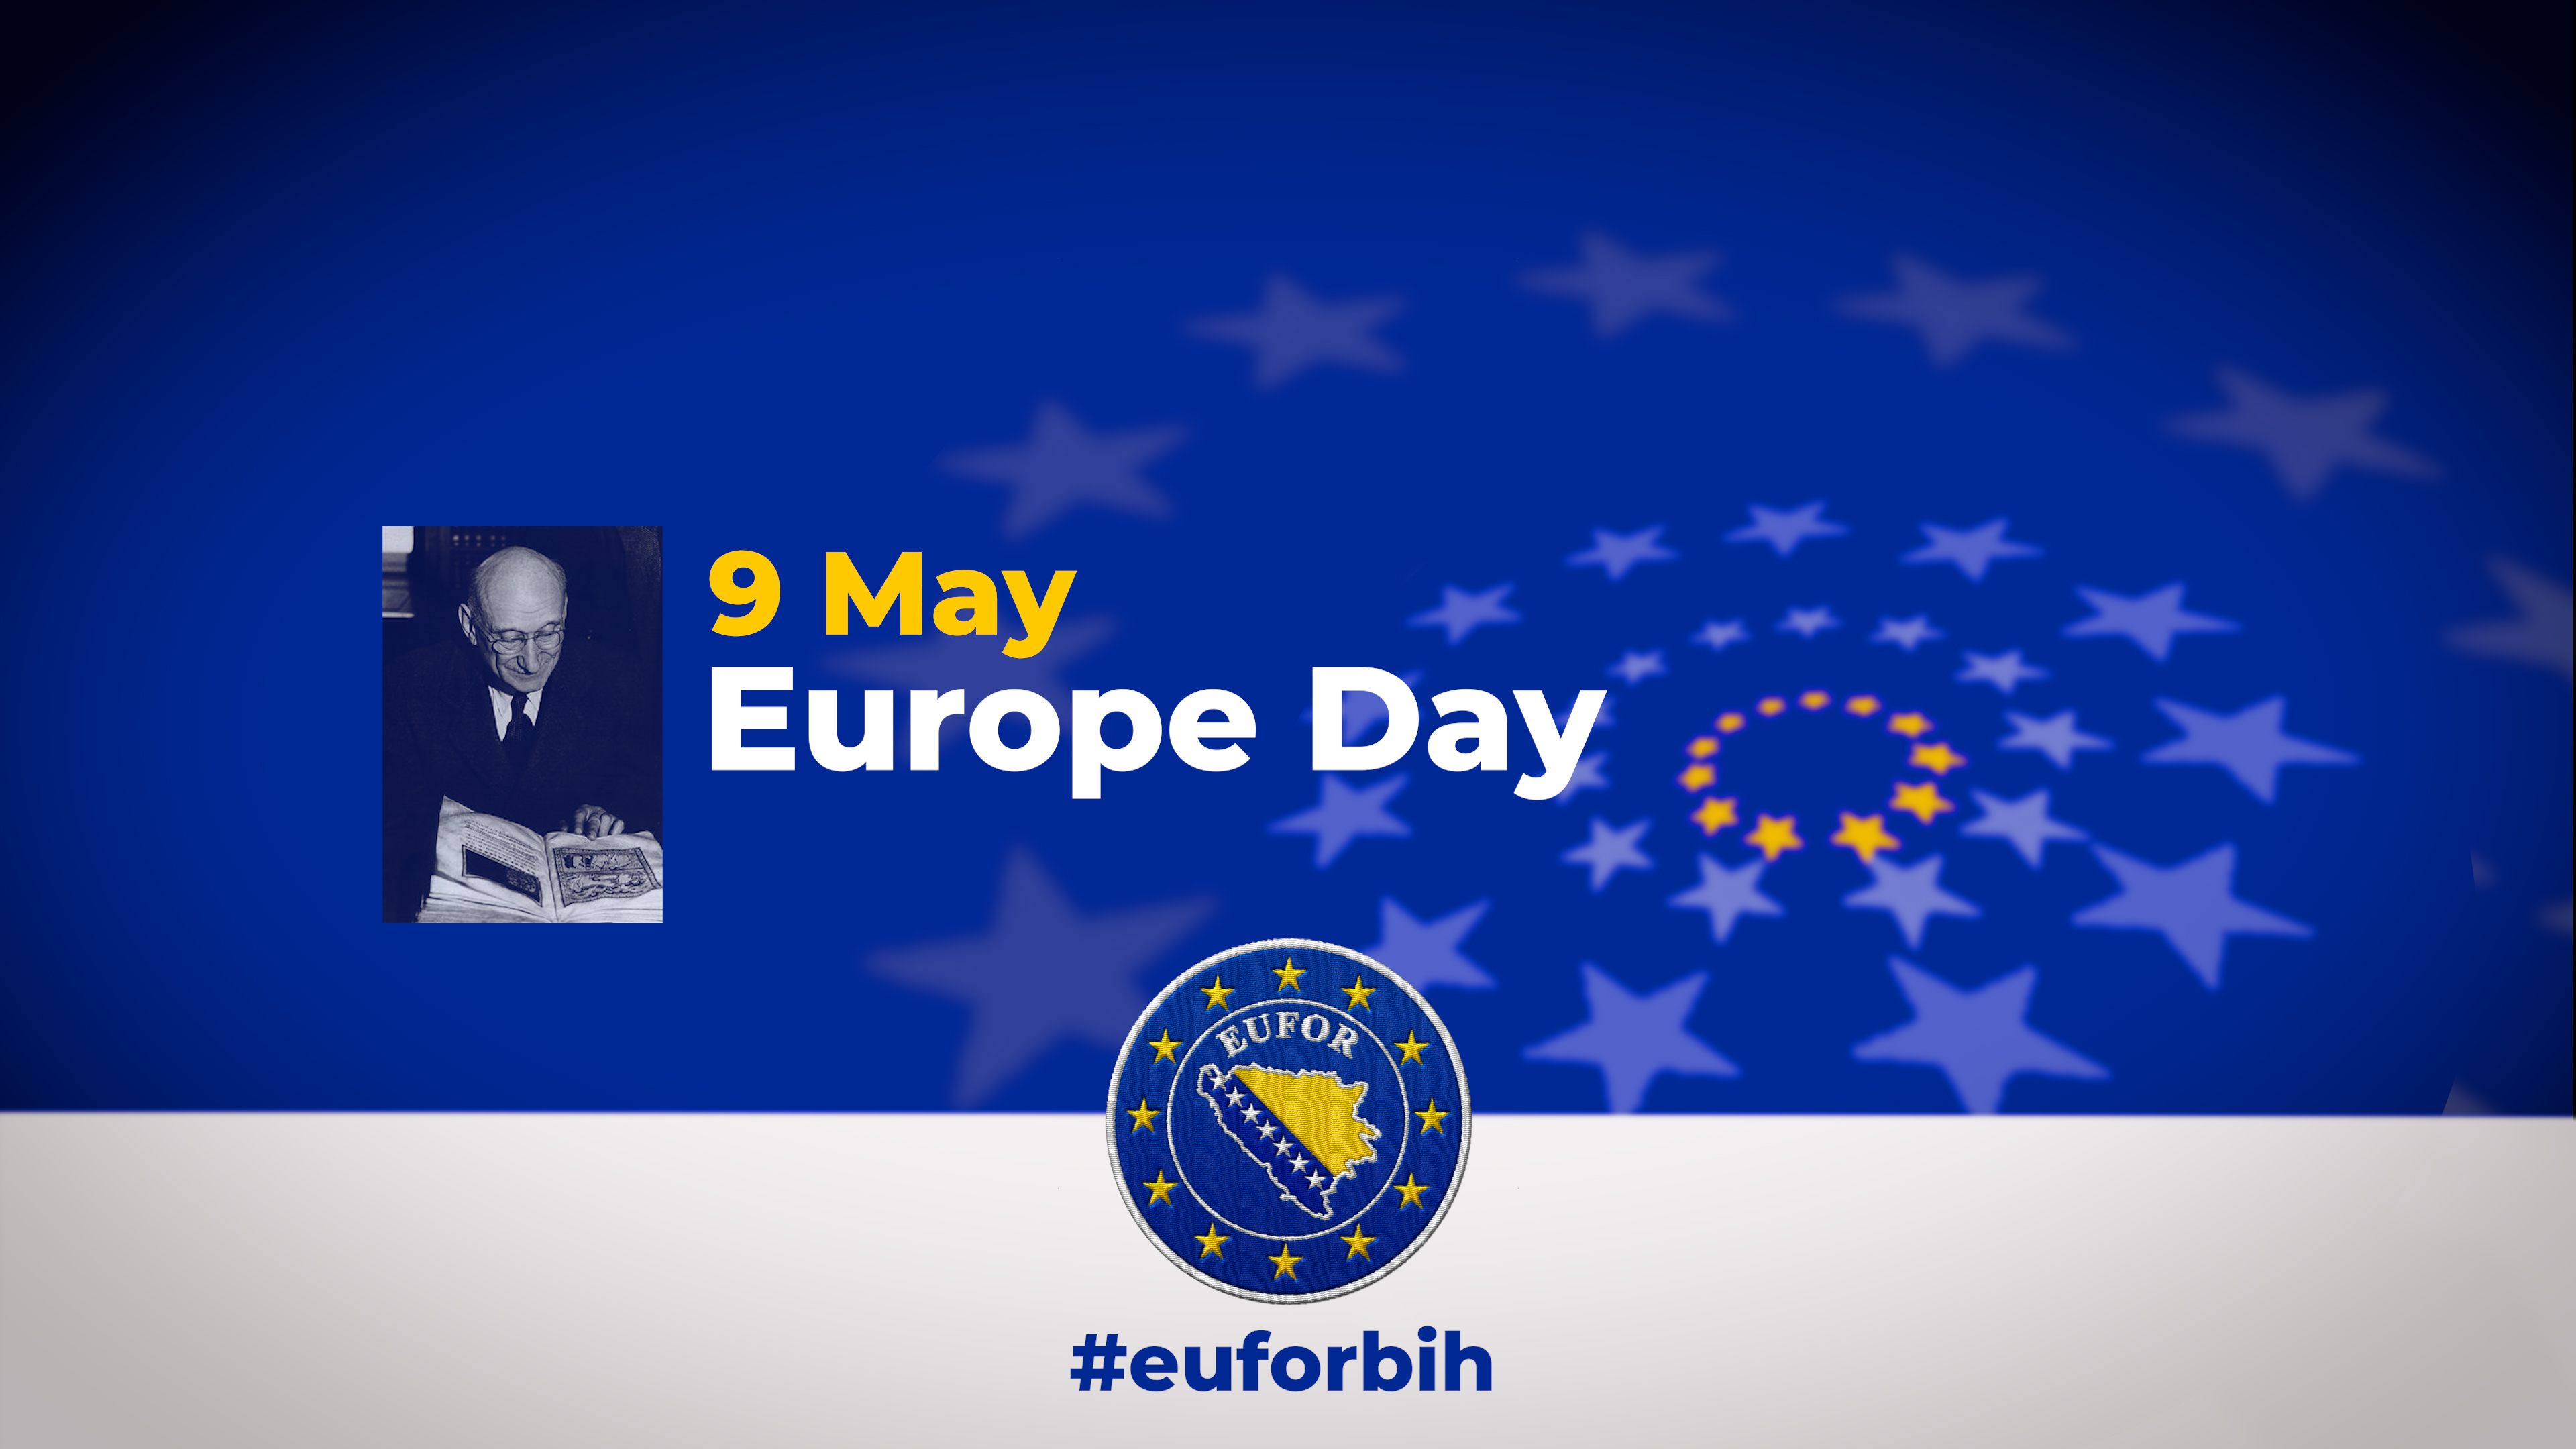 Europe Day is held on 9 May